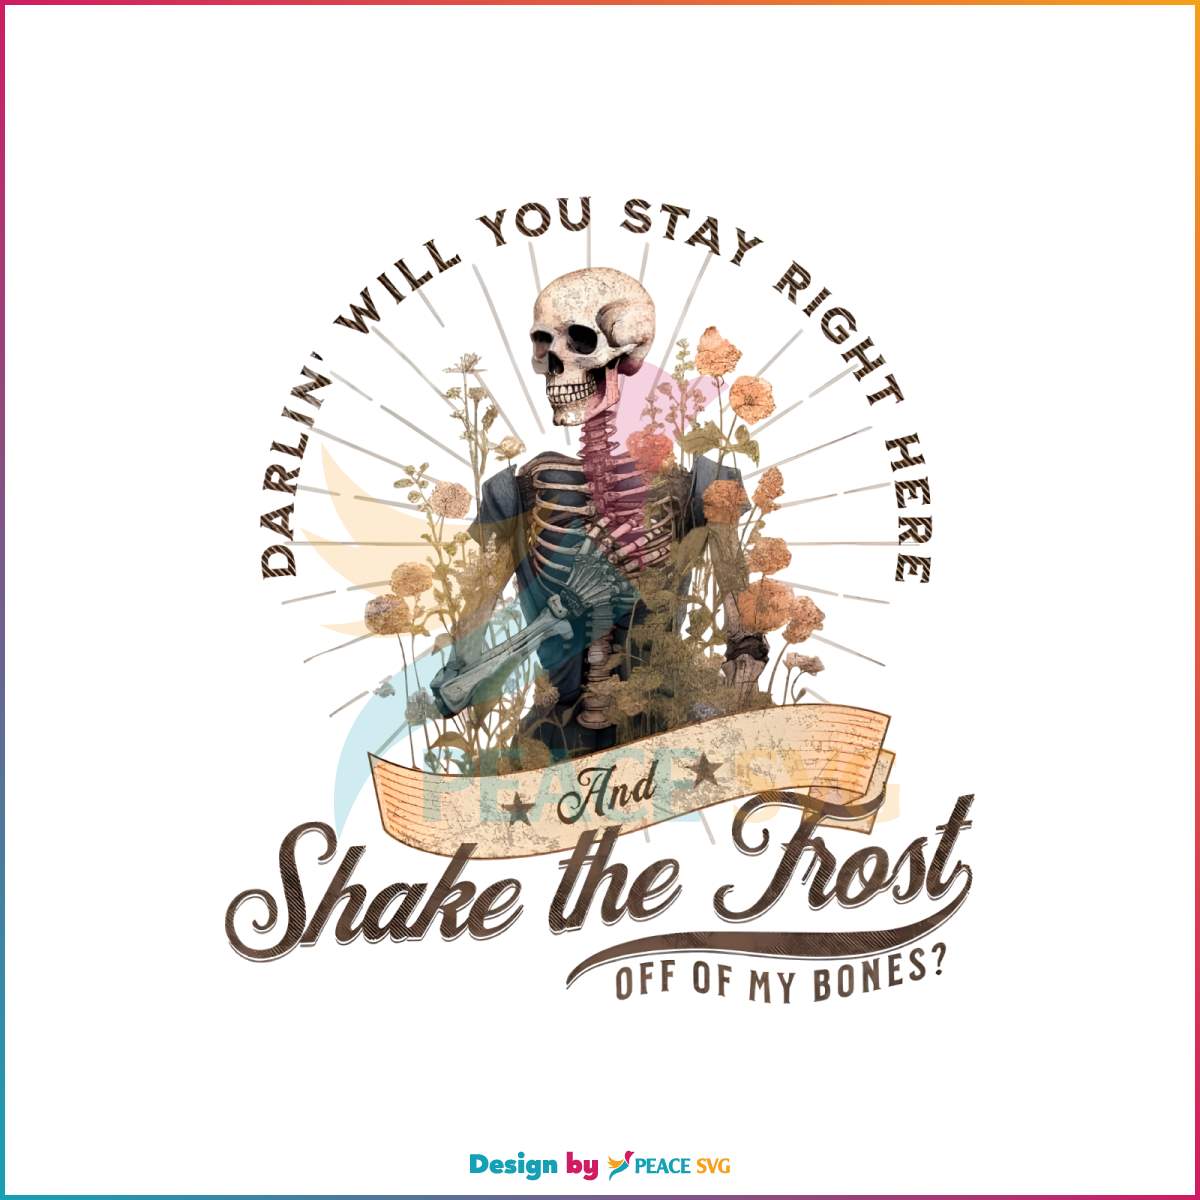 shake-the-frost-tyler-childers-png-sublimation-download